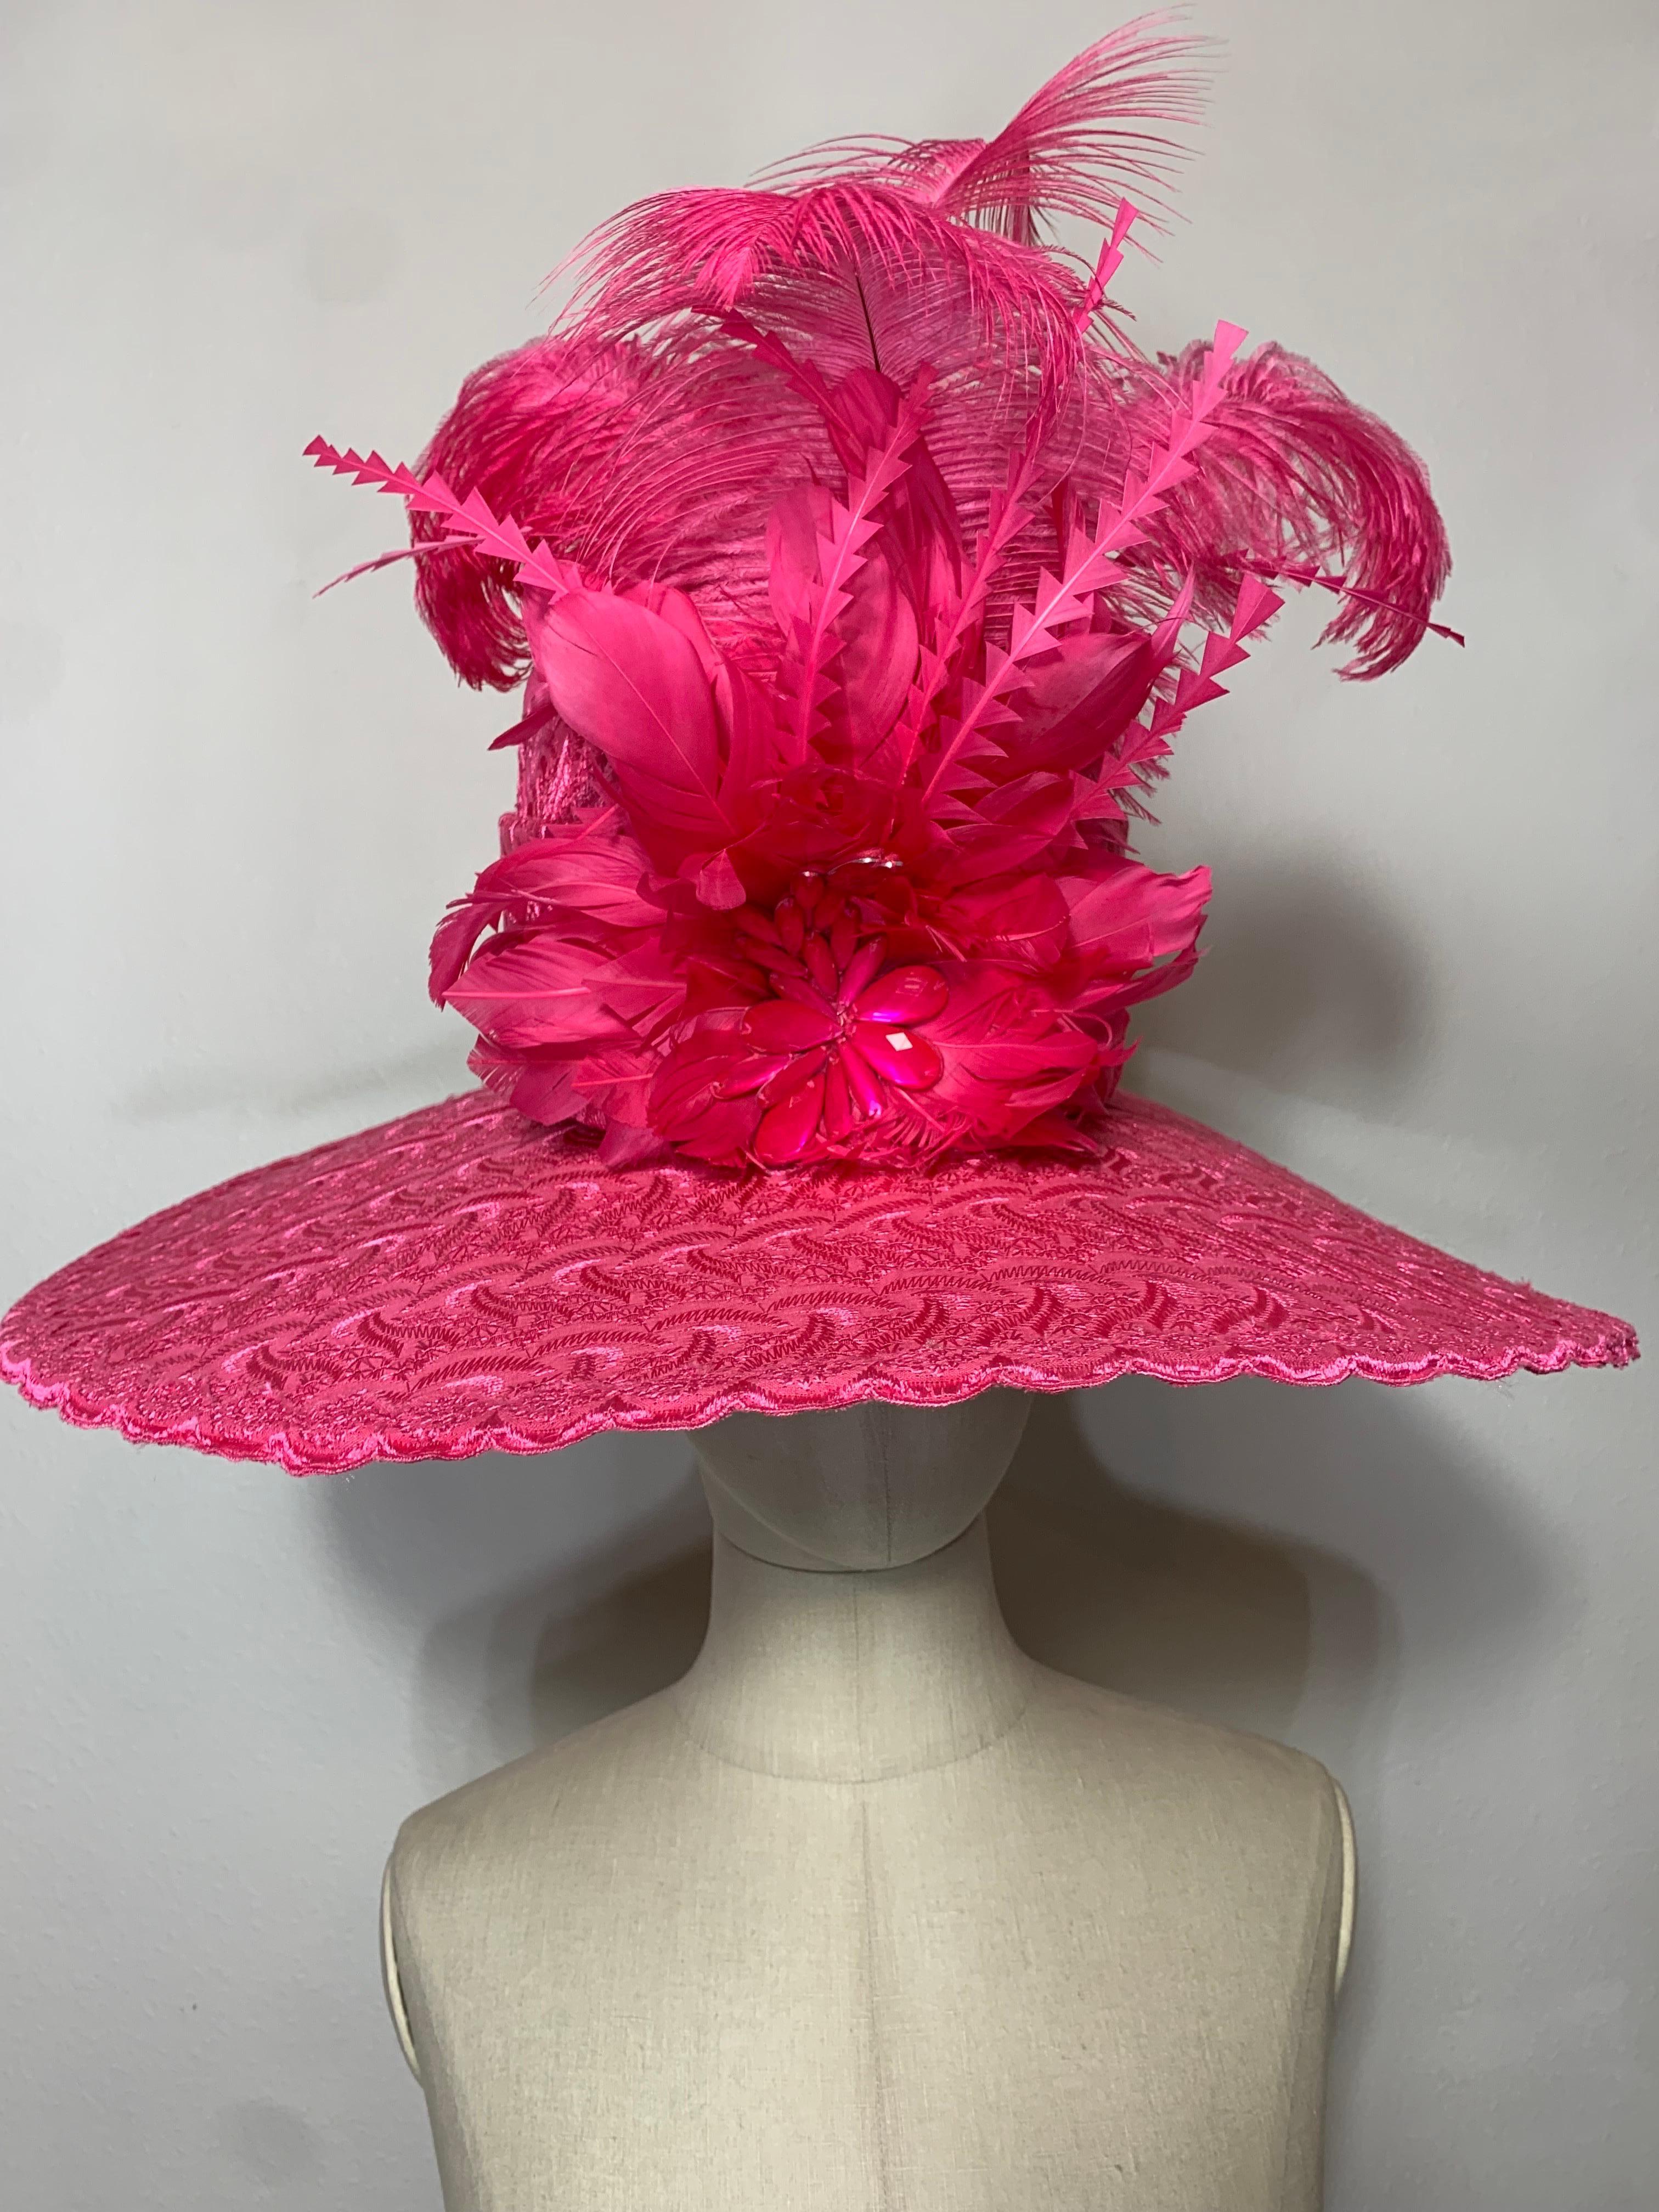 Custom-Made by Suzanne Couture Millinery NY. Spring / Summer. Brilliant Pink Embroidered Cotton Eyelet Fabric Wide-Brimmed Hat:  Tall body, rounded crown hat with wide coordinating fabric band, dyed to match ostrich and rooster feathers clipped and